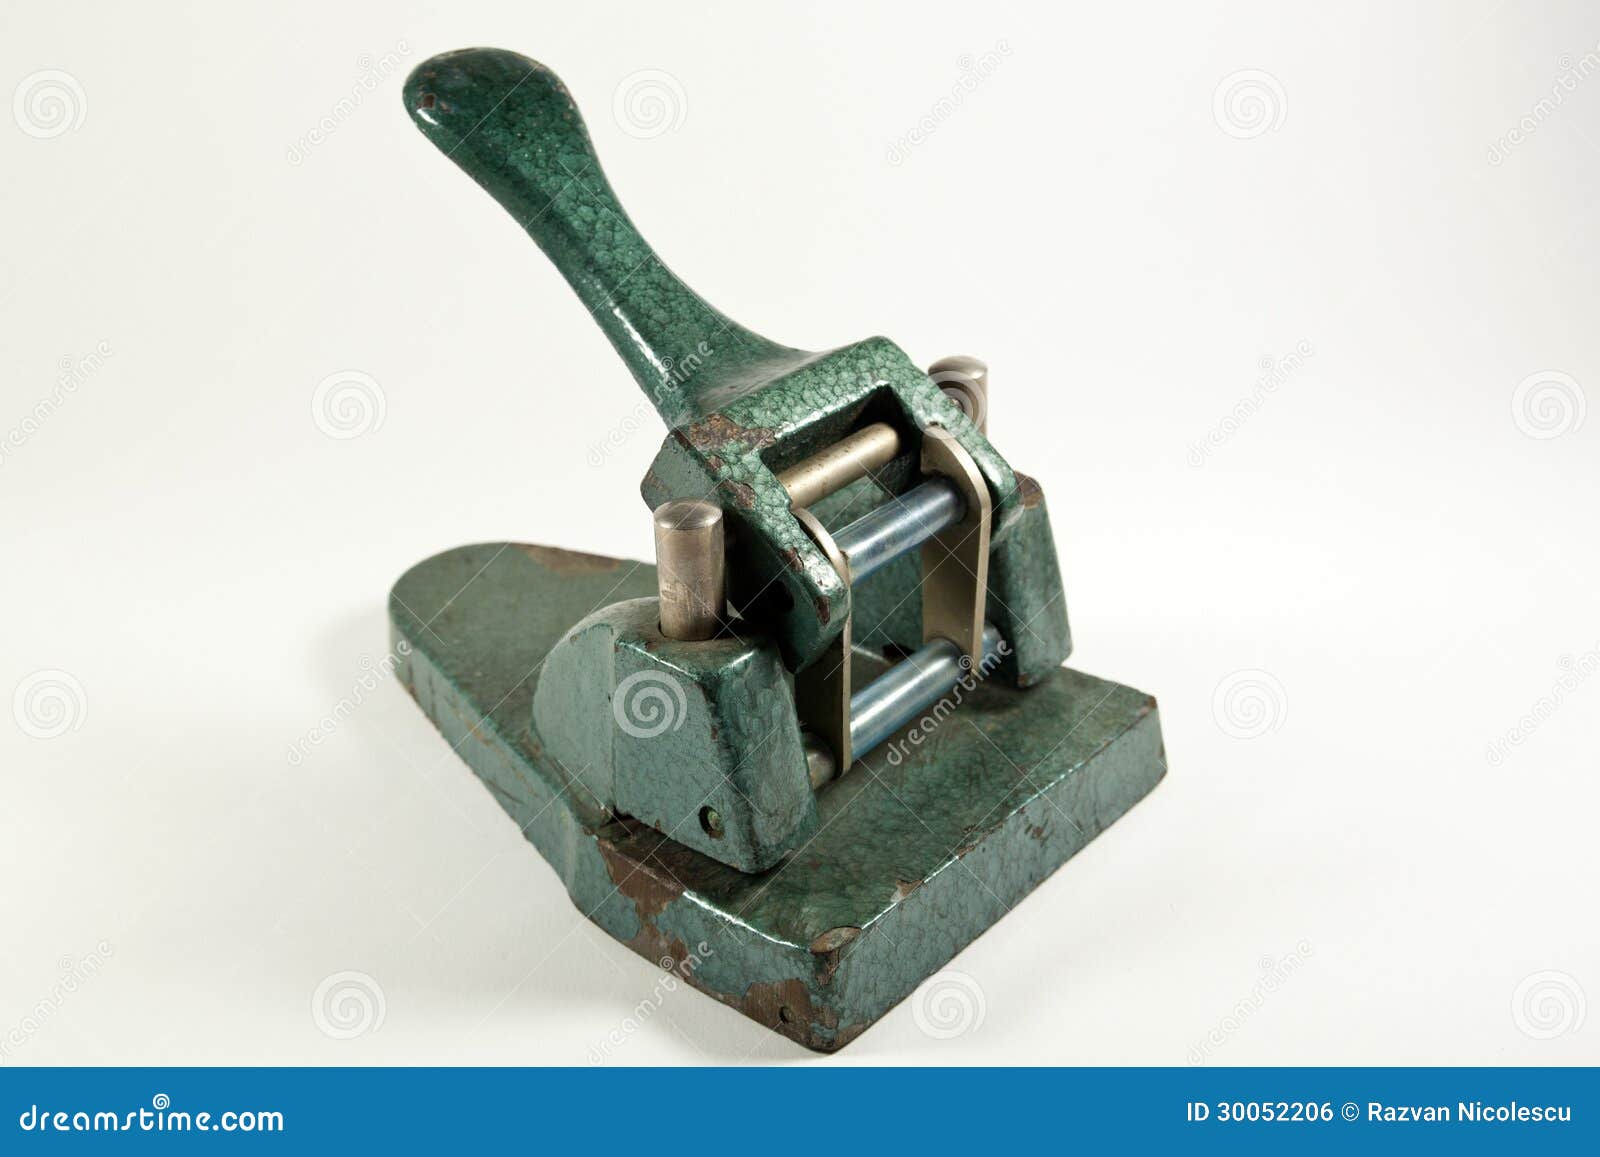 Old paper perforator stock photo. Image of perforator - 30052206